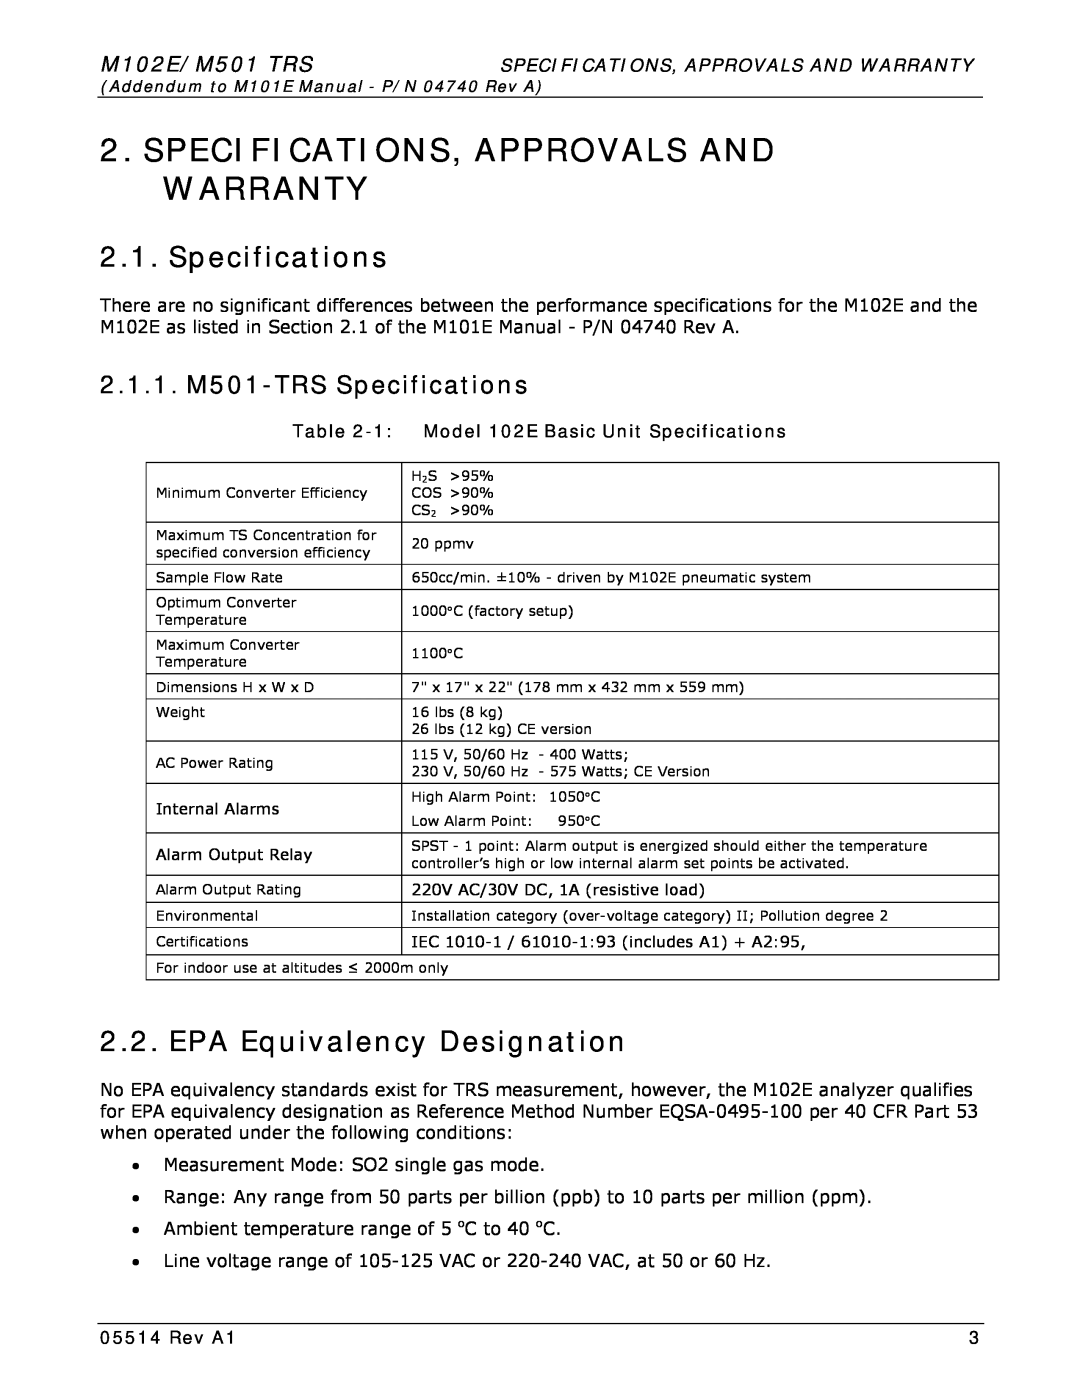 Teledyne 102E Specifications, Approvals And Warranty, EPA Equivalency Designation, 2.1.1. M501-TRS Specifications, Rev A1 